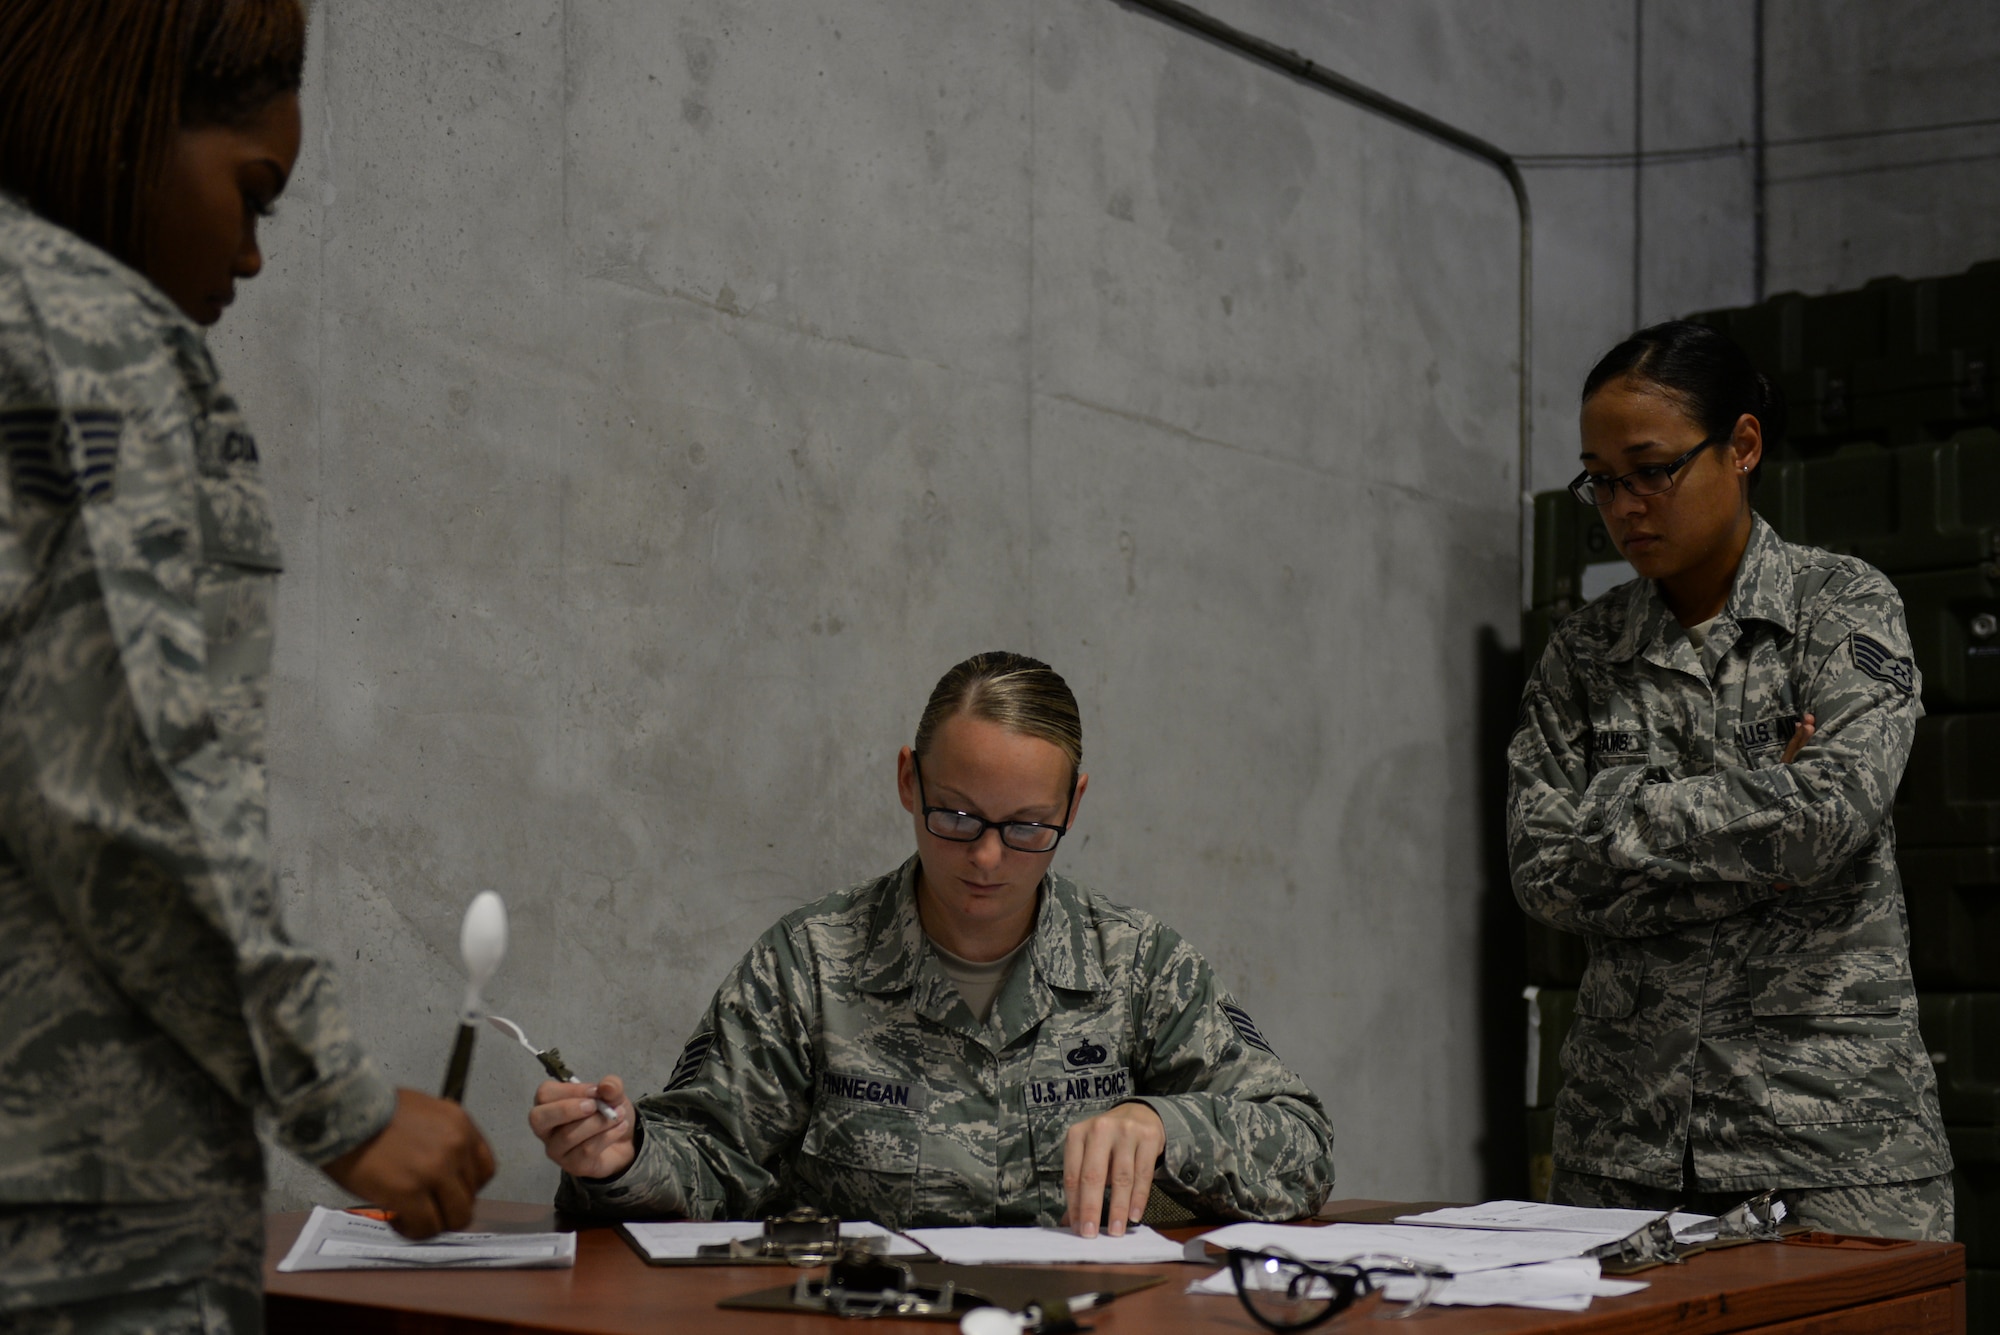 U.S. Air Force Staff Sgt. Nicole Finnegan, 18th Logistics Readiness Squadron central storage supervisor, inspects and reviews mock deployment orders on Kadena Air Base, Japan, Aug. 13, 2015. The 18th LRS Material Management flight trains on Thursdays to ensure the right Airman is outfitted with the right individual protection equipment for each exercise, contingency or operation. (U.S. Air Force photo by Senior Airman Omari Bernard)